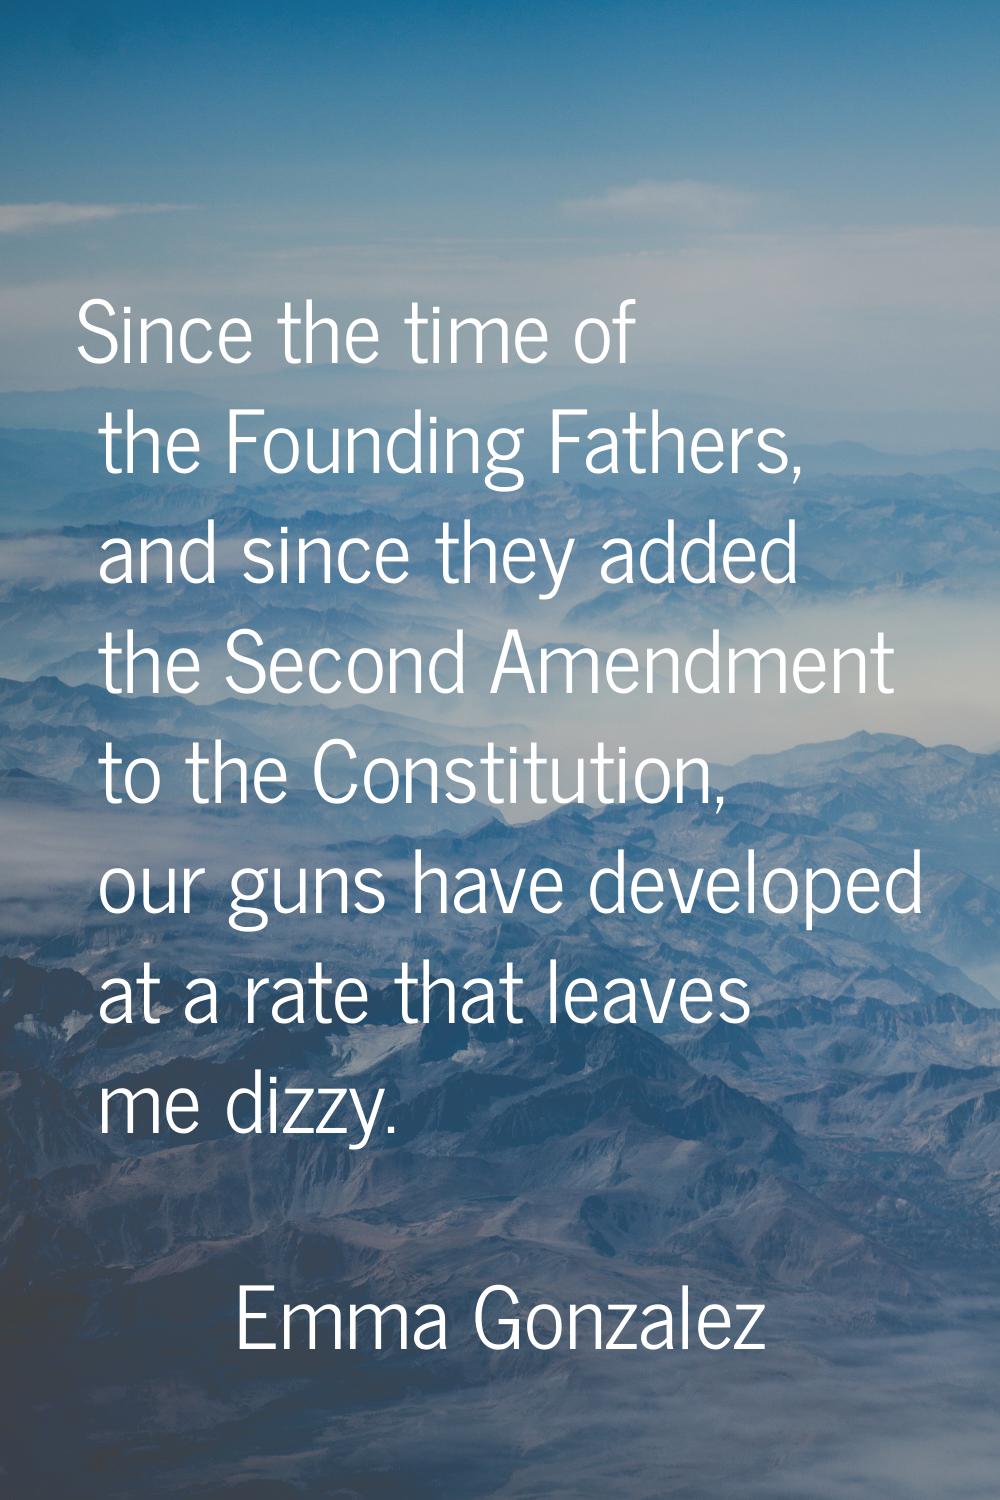 Since the time of the Founding Fathers, and since they added the Second Amendment to the Constituti